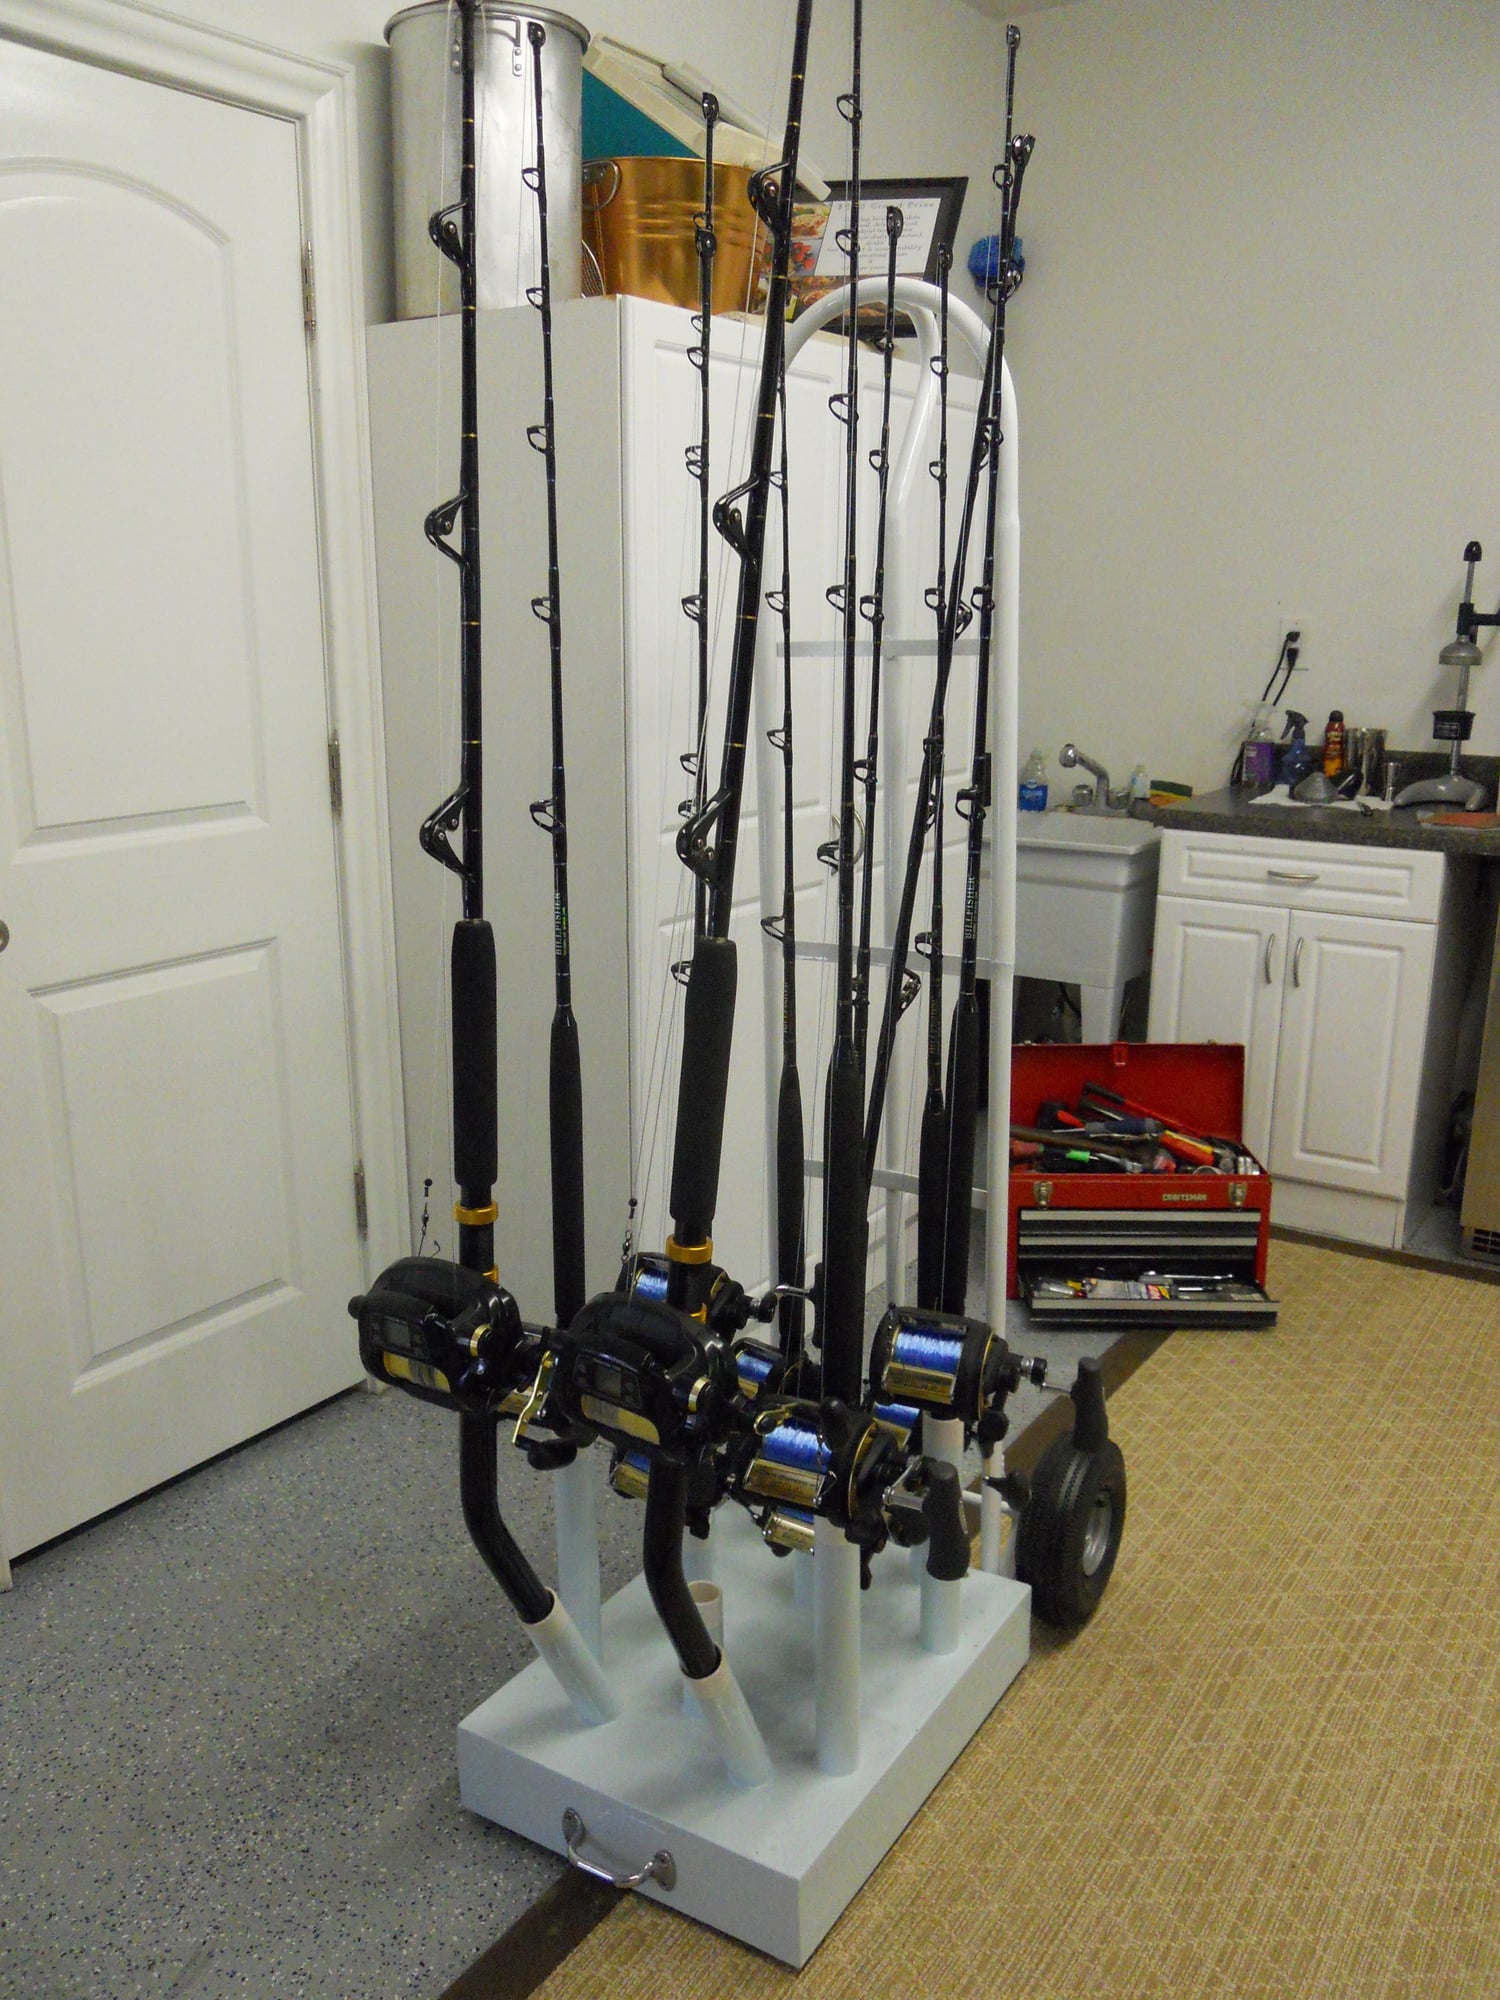 How do you store your rods? - The Hull Truth - Boating and Fishing